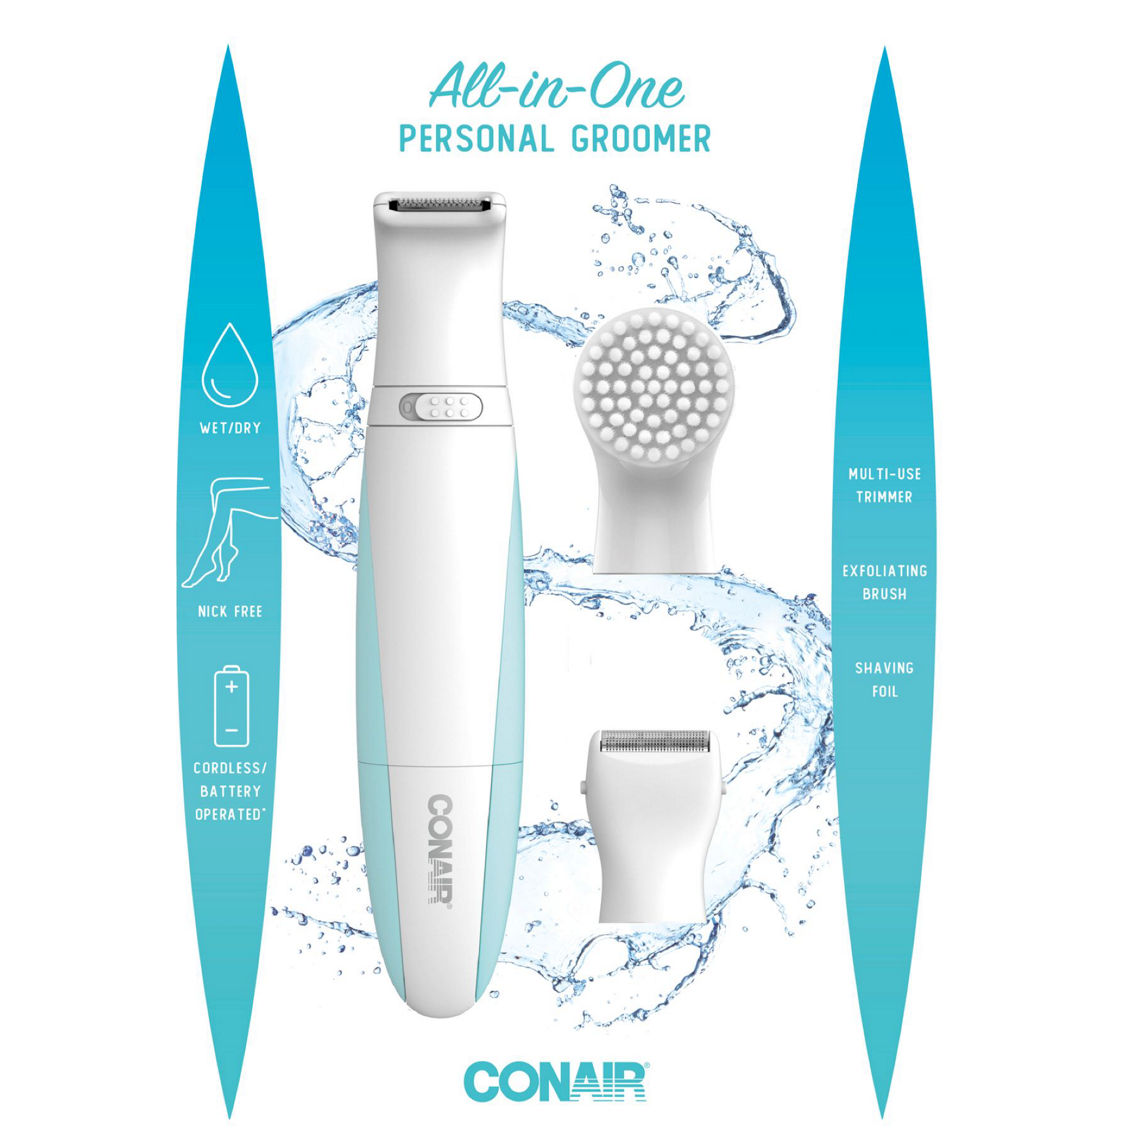 Conair Satiny Smooth All in One Personal Groomer System - Image 2 of 5